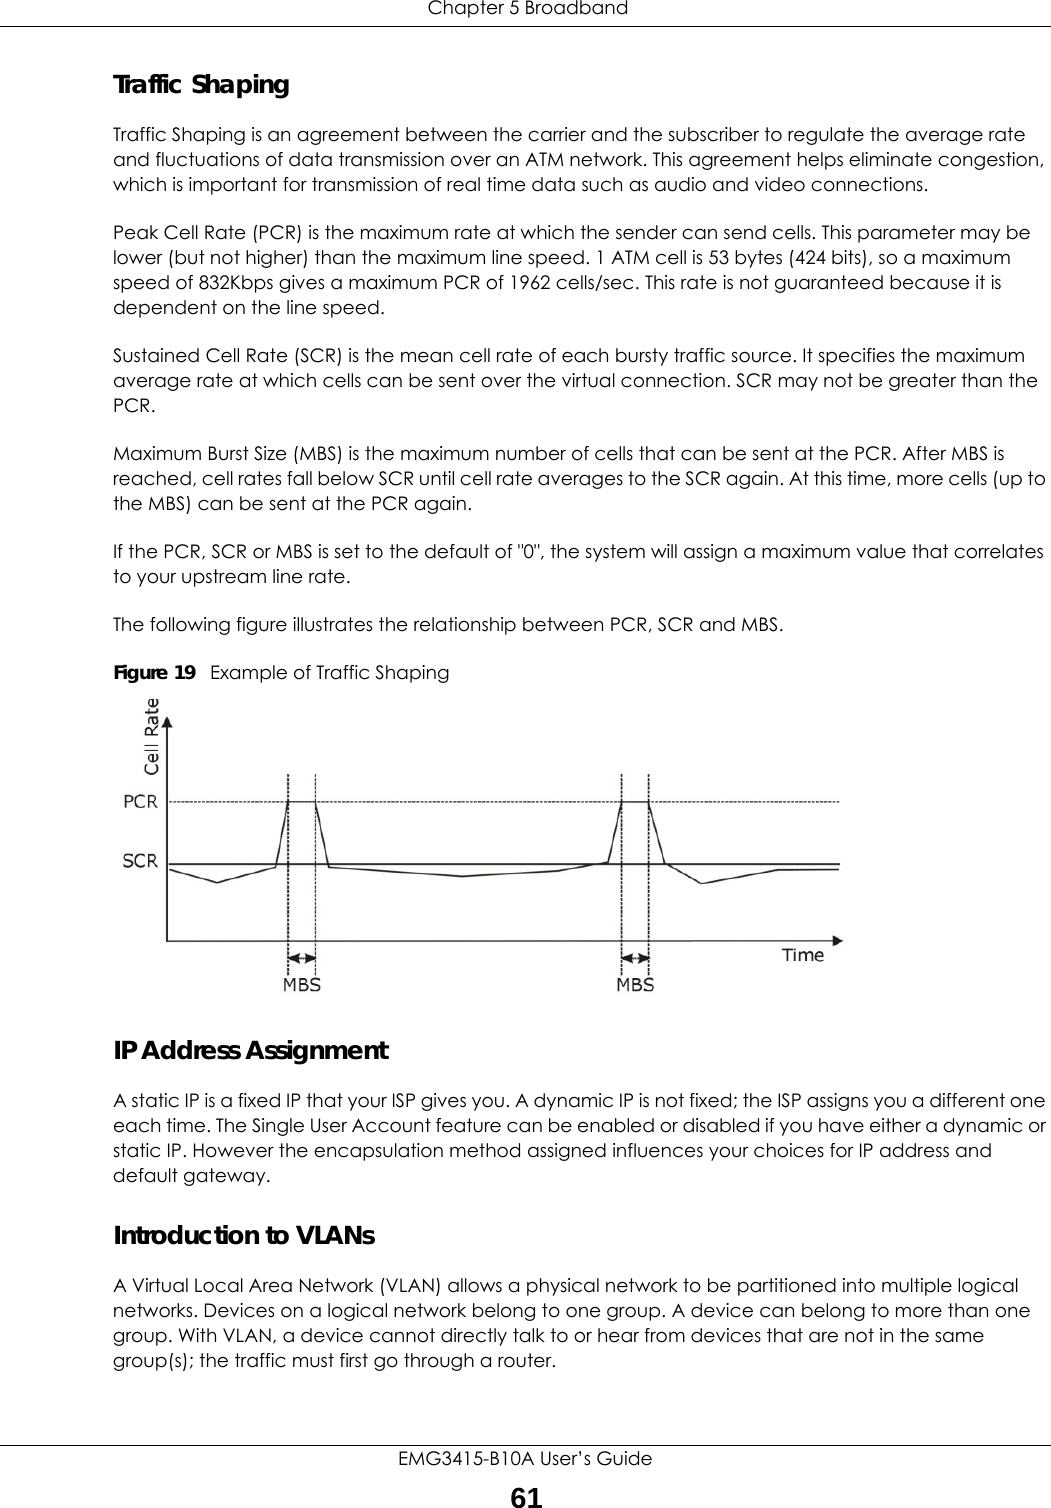  Chapter 5 BroadbandEMG3415-B10A User’s Guide61Traffic ShapingTraffic Shaping is an agreement between the carrier and the subscriber to regulate the average rate and fluctuations of data transmission over an ATM network. This agreement helps eliminate congestion, which is important for transmission of real time data such as audio and video connections.Peak Cell Rate (PCR) is the maximum rate at which the sender can send cells. This parameter may be lower (but not higher) than the maximum line speed. 1 ATM cell is 53 bytes (424 bits), so a maximum speed of 832Kbps gives a maximum PCR of 1962 cells/sec. This rate is not guaranteed because it is dependent on the line speed.Sustained Cell Rate (SCR) is the mean cell rate of each bursty traffic source. It specifies the maximum average rate at which cells can be sent over the virtual connection. SCR may not be greater than the PCR.Maximum Burst Size (MBS) is the maximum number of cells that can be sent at the PCR. After MBS is reached, cell rates fall below SCR until cell rate averages to the SCR again. At this time, more cells (up to the MBS) can be sent at the PCR again.If the PCR, SCR or MBS is set to the default of &quot;0&quot;, the system will assign a maximum value that correlates to your upstream line rate. The following figure illustrates the relationship between PCR, SCR and MBS. Figure 19   Example of Traffic ShapingIP Address AssignmentA static IP is a fixed IP that your ISP gives you. A dynamic IP is not fixed; the ISP assigns you a different one each time. The Single User Account feature can be enabled or disabled if you have either a dynamic or static IP. However the encapsulation method assigned influences your choices for IP address and default gateway.Introduction to VLANs A Virtual Local Area Network (VLAN) allows a physical network to be partitioned into multiple logical networks. Devices on a logical network belong to one group. A device can belong to more than one group. With VLAN, a device cannot directly talk to or hear from devices that are not in the same group(s); the traffic must first go through a router.